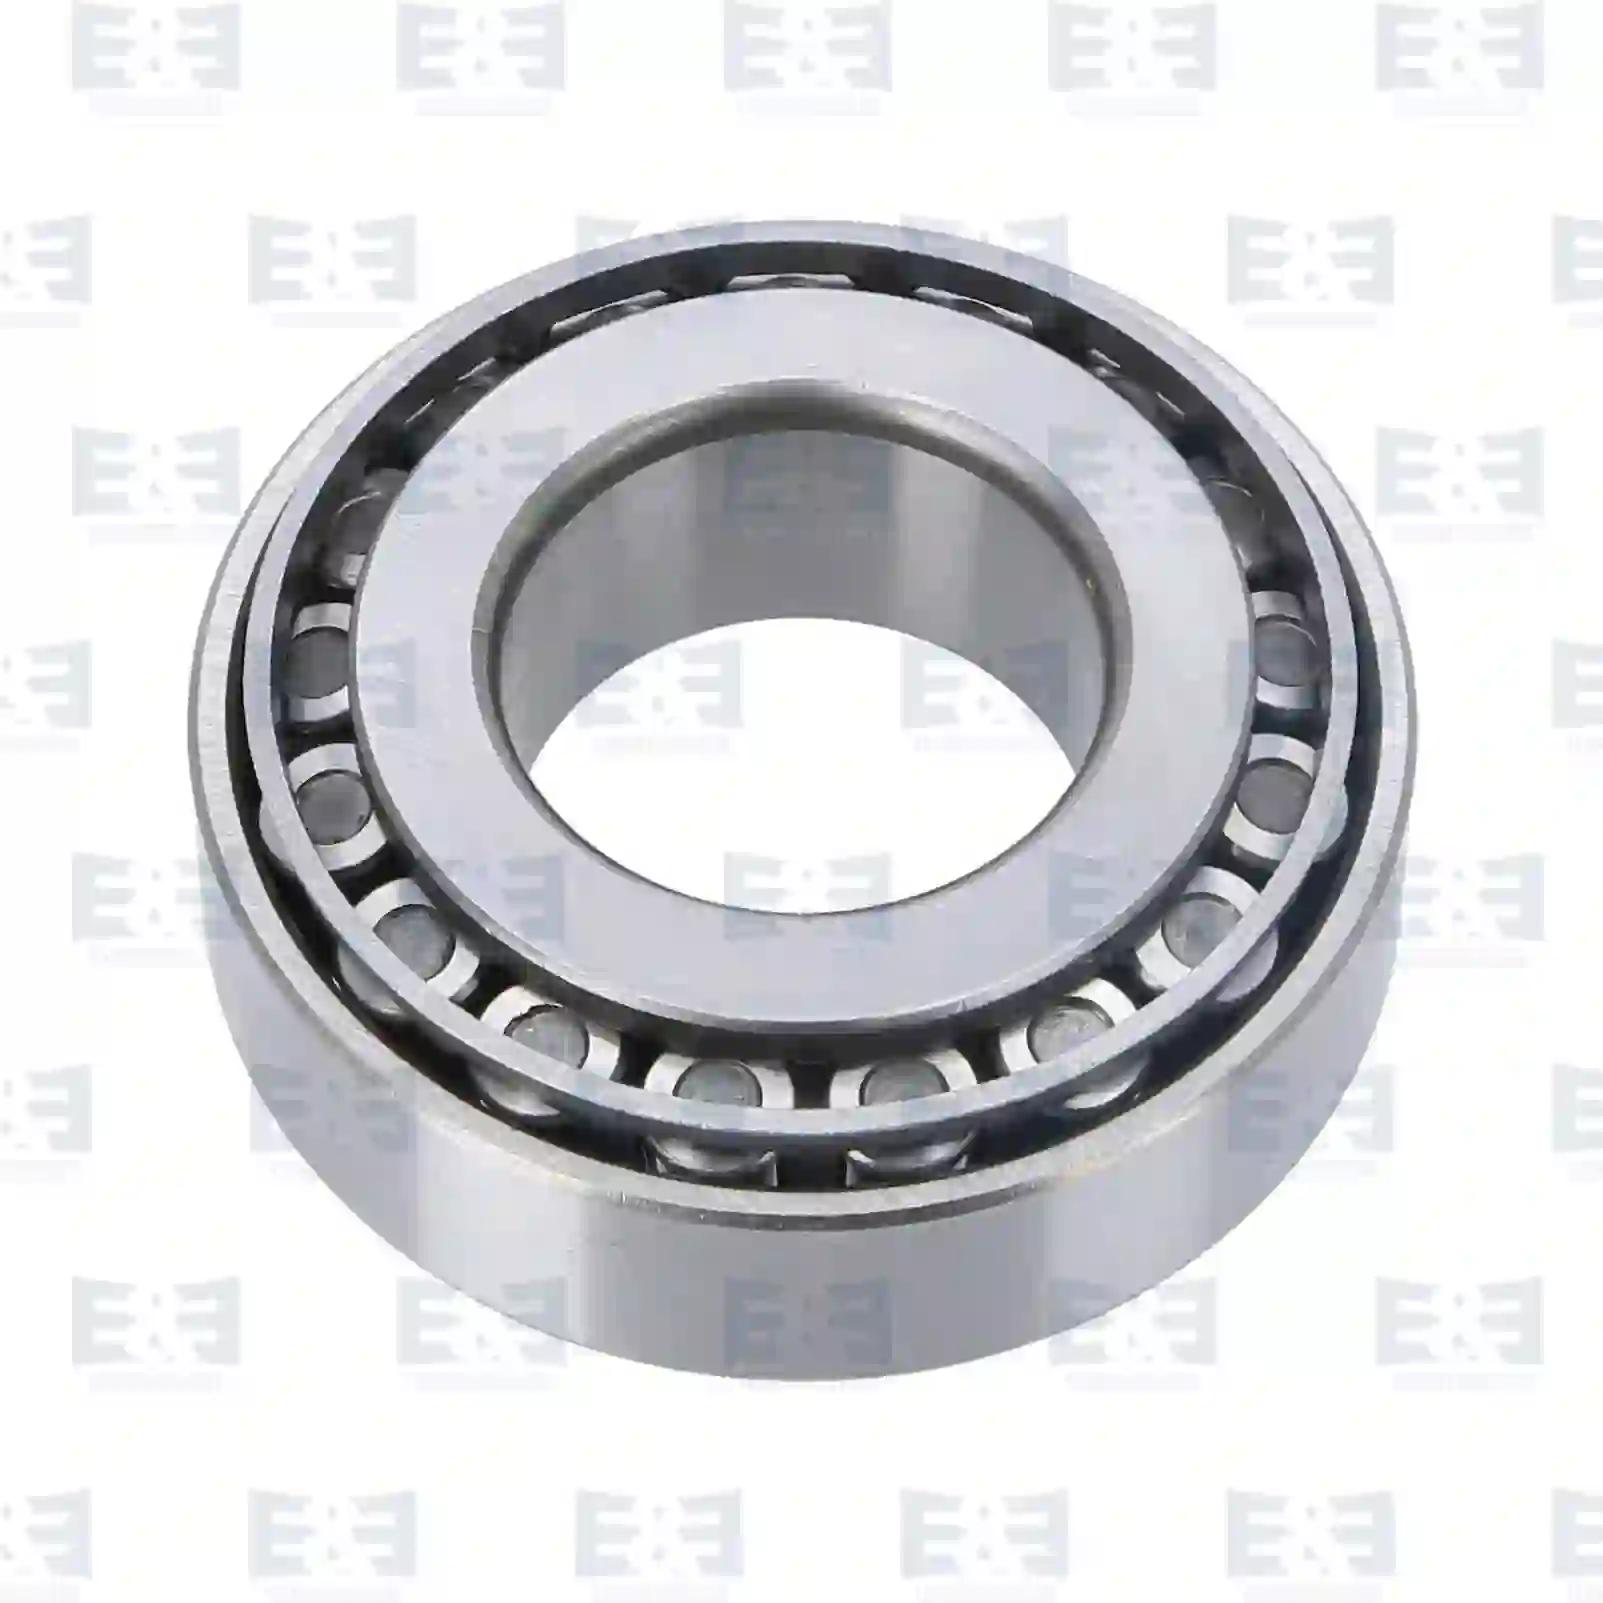 Tapered roller bearing, 2E2286403, 0264053500, MA111370, MB025345, MB035007, MB393956, 15919, 005092244, 1440637X1, TK004209923, TK4209923, 12337579, 94032099, 94248083, 988435105, 988435105A, 988435109, 988435109A, SZ36635005, 91007-P5D-007, 91007-PY4-003, 53232-11000, 8-12337579-0, 8-94248083-0, 8-94248083-1, 9-00093172-0, 26800130, 00221-27210, 06324990068, 06324990079, 81934200064, 87523300200, A0773220700, 022127141, 0221271410, 022127210, 055933075, 075527141, 000720032207, 0089817405, 0089817605, 2506263031, 250626303101, 3199810005, MA111370, MB0025345, MB025345, MB035007, MB393956, 32219-9X501, 40210-F3900, 0023432207, 0959232207, 0959532207, 5000388284, 5000388401, 5010241918, 5516010573, 7701465647, 7703090093, 202635, 183684, 19577, ZG02971-0008 ||  2E2286403 E&E Truck Spare Parts | Truck Spare Parts, Auotomotive Spare Parts Tapered roller bearing, 2E2286403, 0264053500, MA111370, MB025345, MB035007, MB393956, 15919, 005092244, 1440637X1, TK004209923, TK4209923, 12337579, 94032099, 94248083, 988435105, 988435105A, 988435109, 988435109A, SZ36635005, 91007-P5D-007, 91007-PY4-003, 53232-11000, 8-12337579-0, 8-94248083-0, 8-94248083-1, 9-00093172-0, 26800130, 00221-27210, 06324990068, 06324990079, 81934200064, 87523300200, A0773220700, 022127141, 0221271410, 022127210, 055933075, 075527141, 000720032207, 0089817405, 0089817605, 2506263031, 250626303101, 3199810005, MA111370, MB0025345, MB025345, MB035007, MB393956, 32219-9X501, 40210-F3900, 0023432207, 0959232207, 0959532207, 5000388284, 5000388401, 5010241918, 5516010573, 7701465647, 7703090093, 202635, 183684, 19577, ZG02971-0008 ||  2E2286403 E&E Truck Spare Parts | Truck Spare Parts, Auotomotive Spare Parts